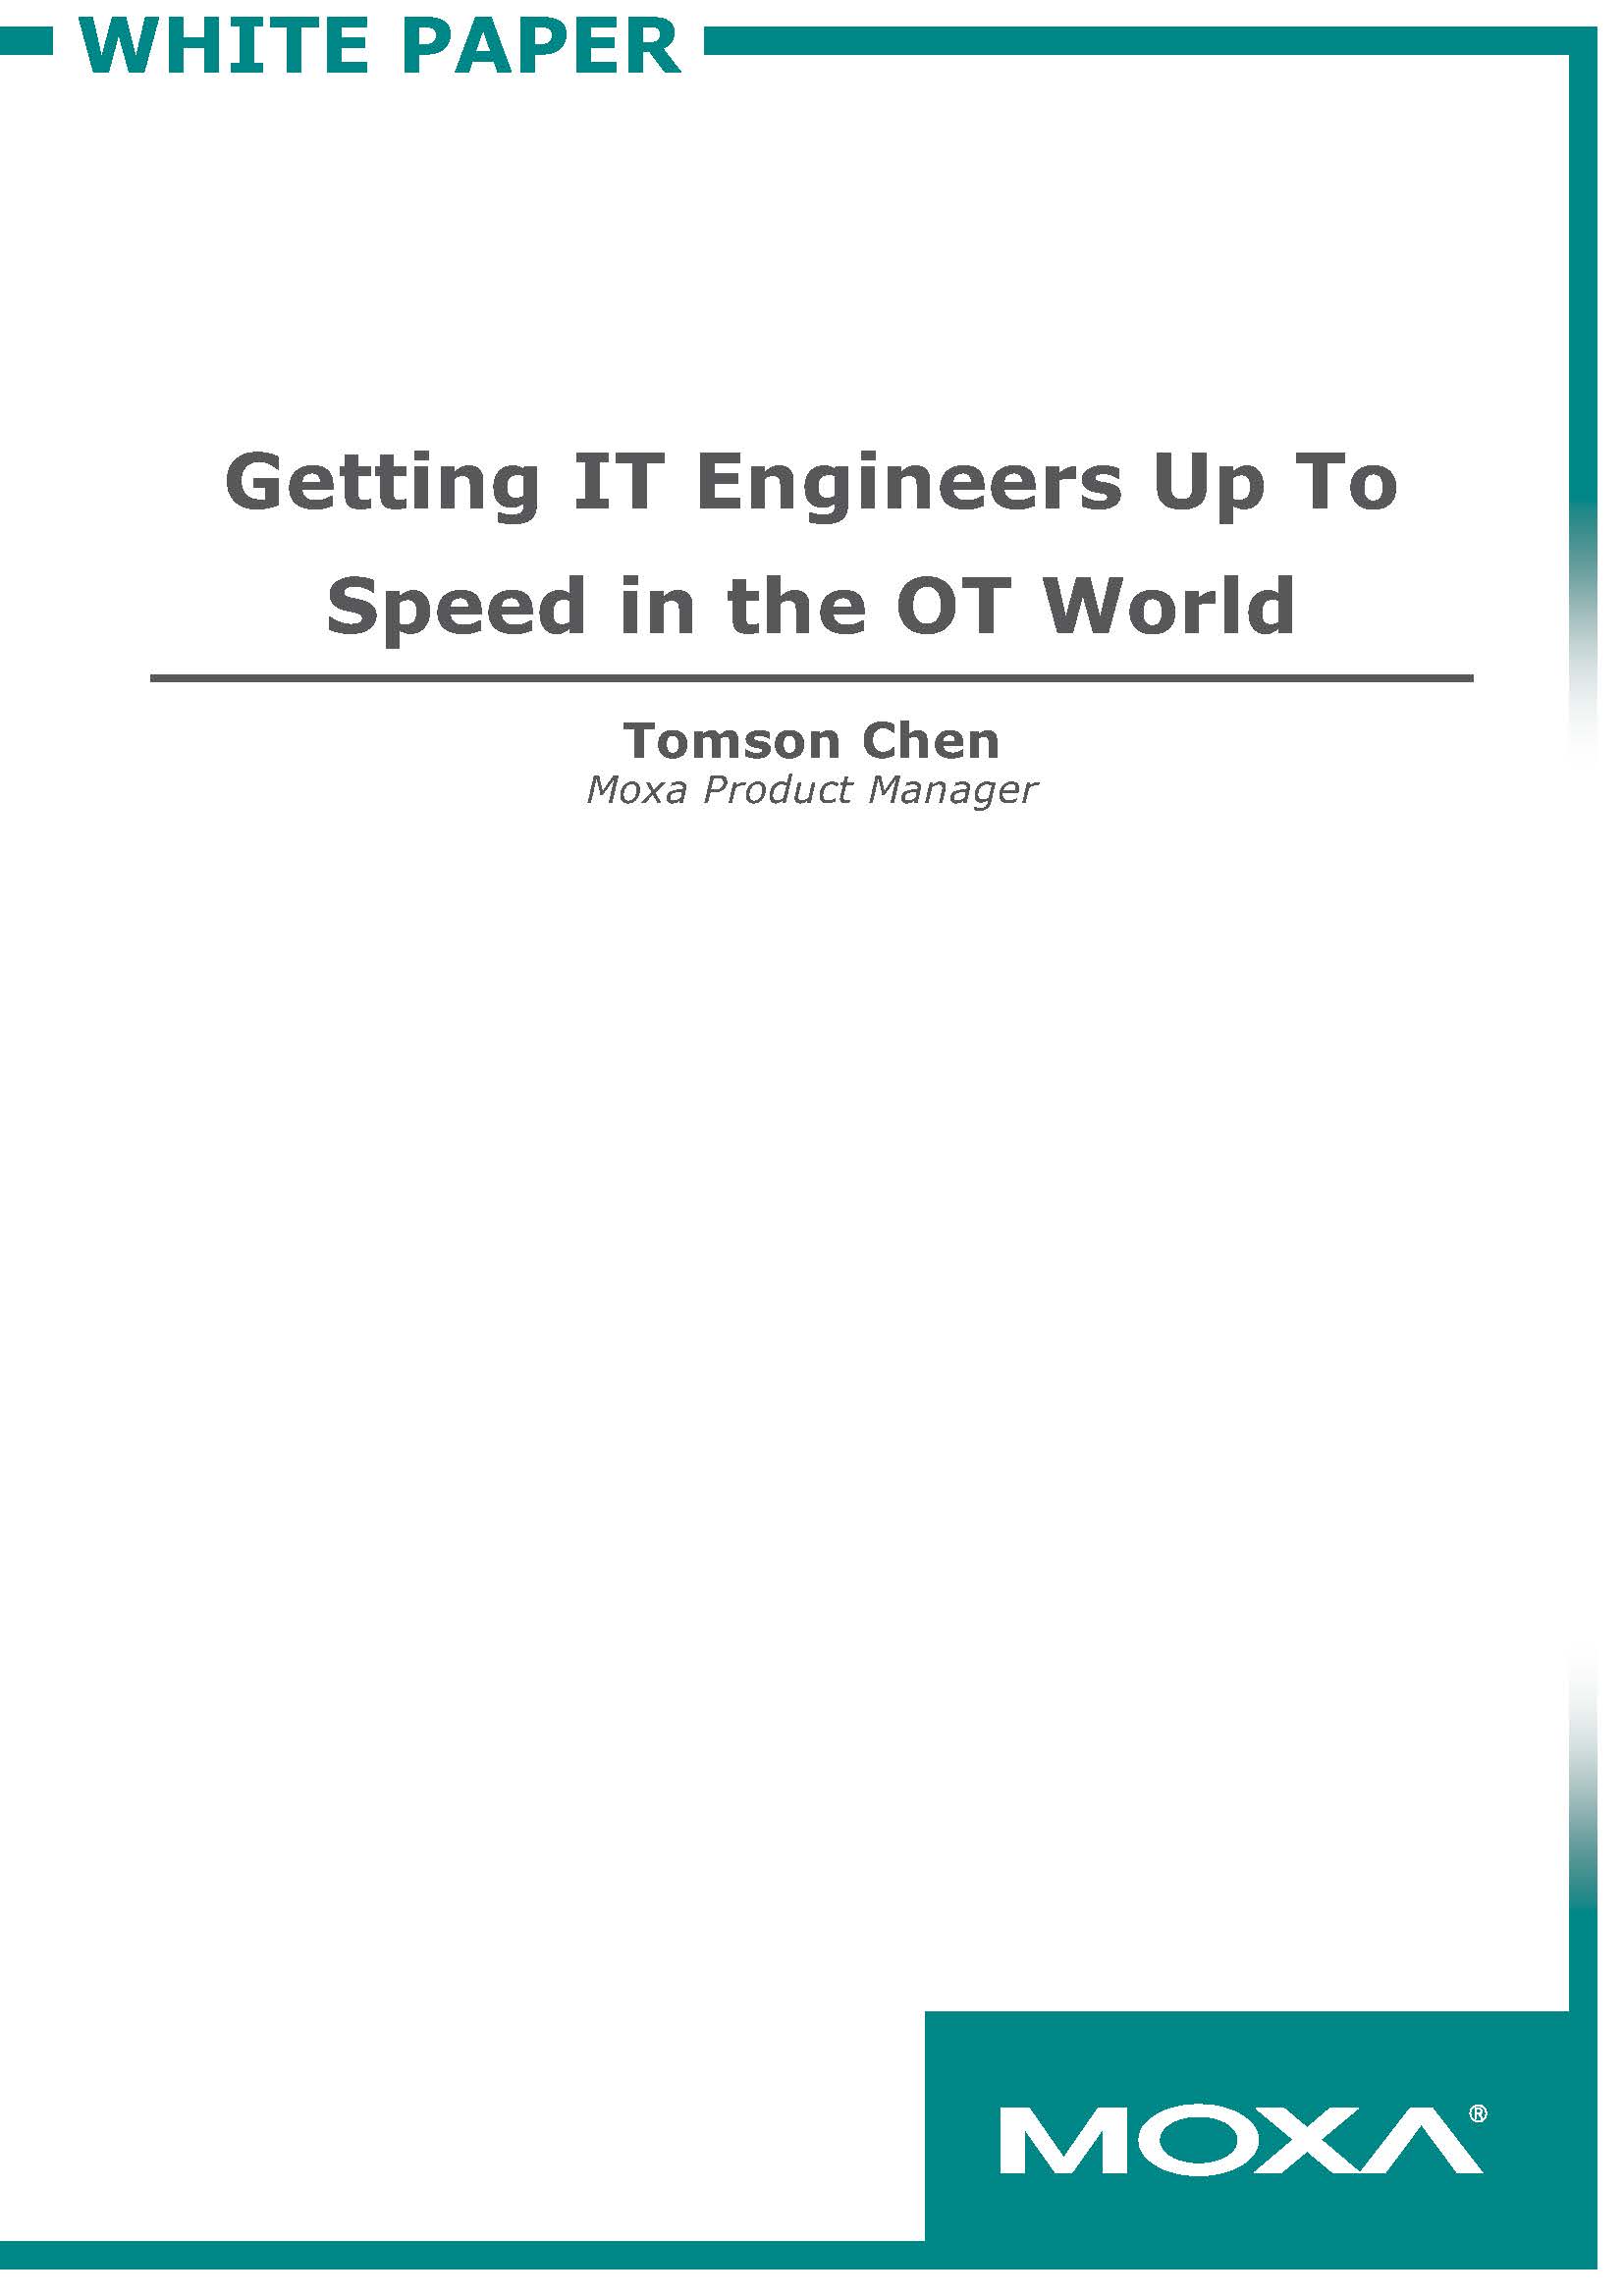 Getting_IT_Engineers_Up_To_Speed_in_the_OT_World_Page_1.jpg